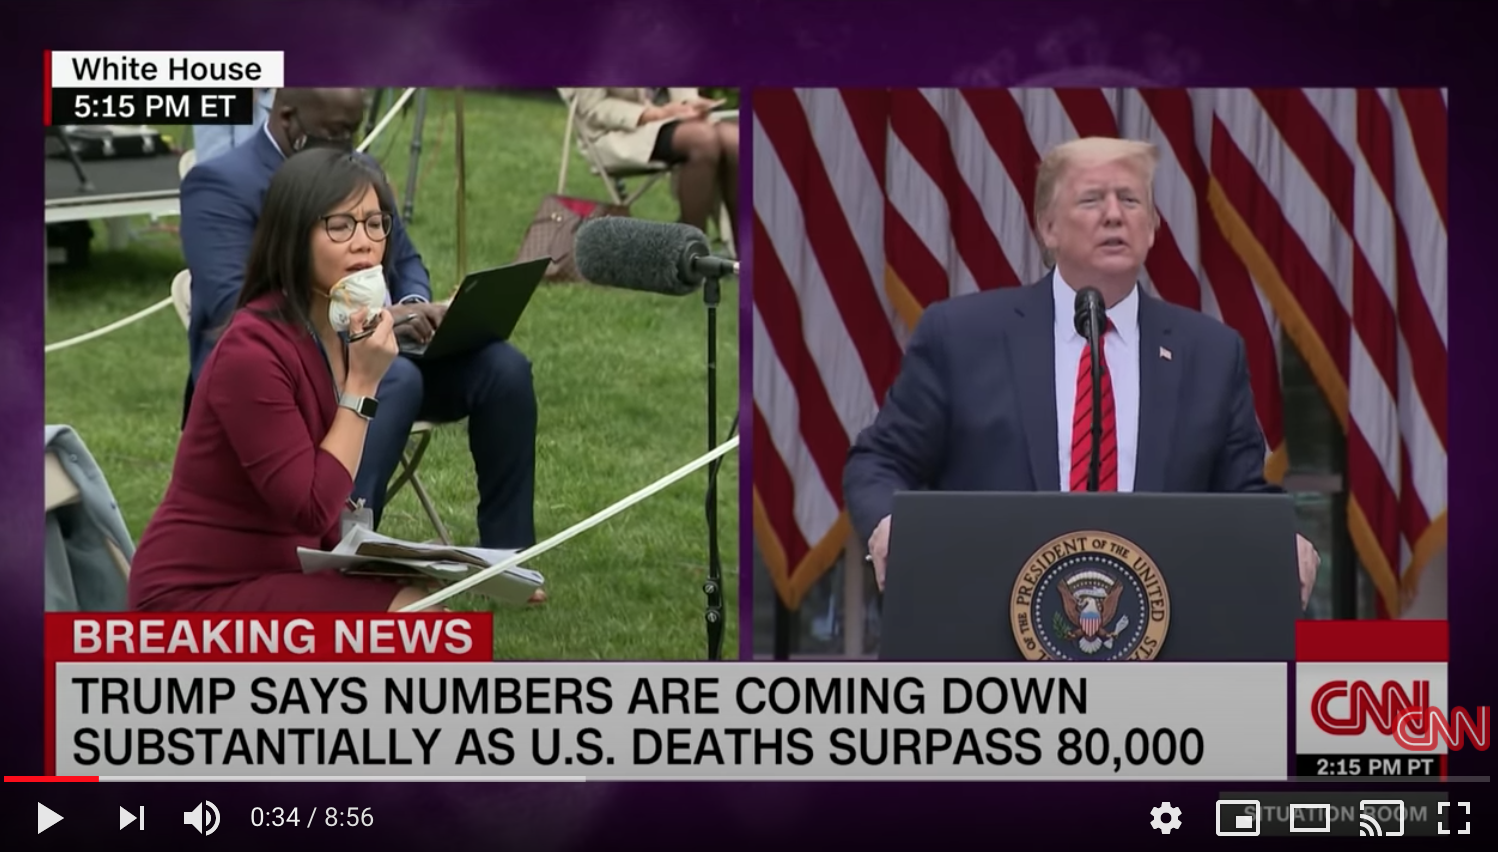 CBS Reporter Weijia Jiang astounded at Trump's response during news conference